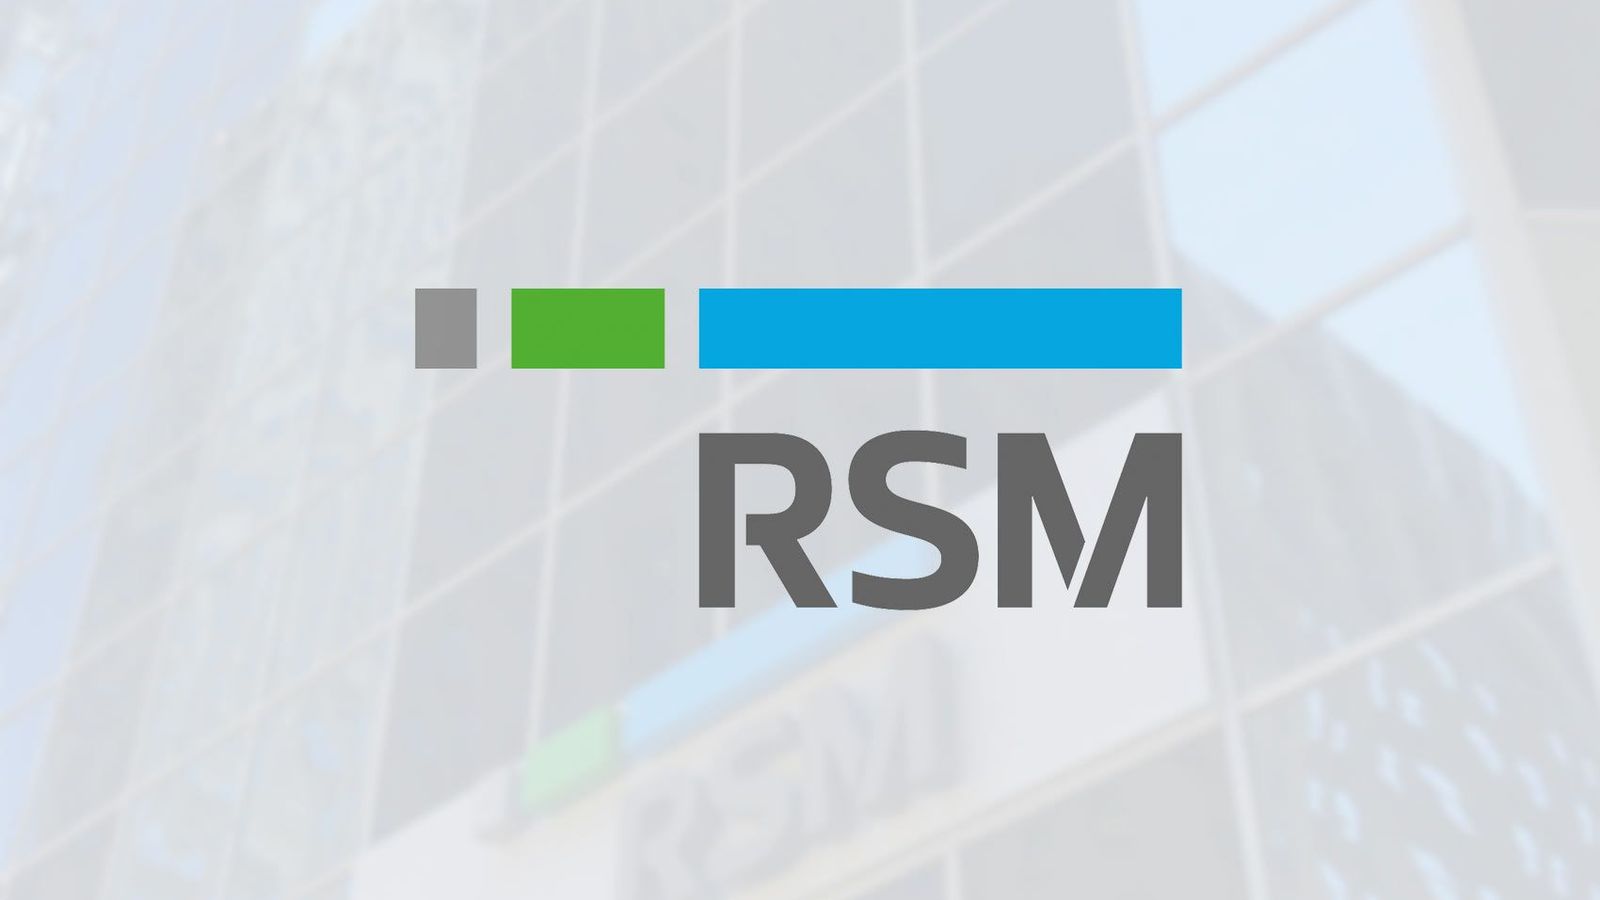 RSM Helps Employees Build Their Own Success Story